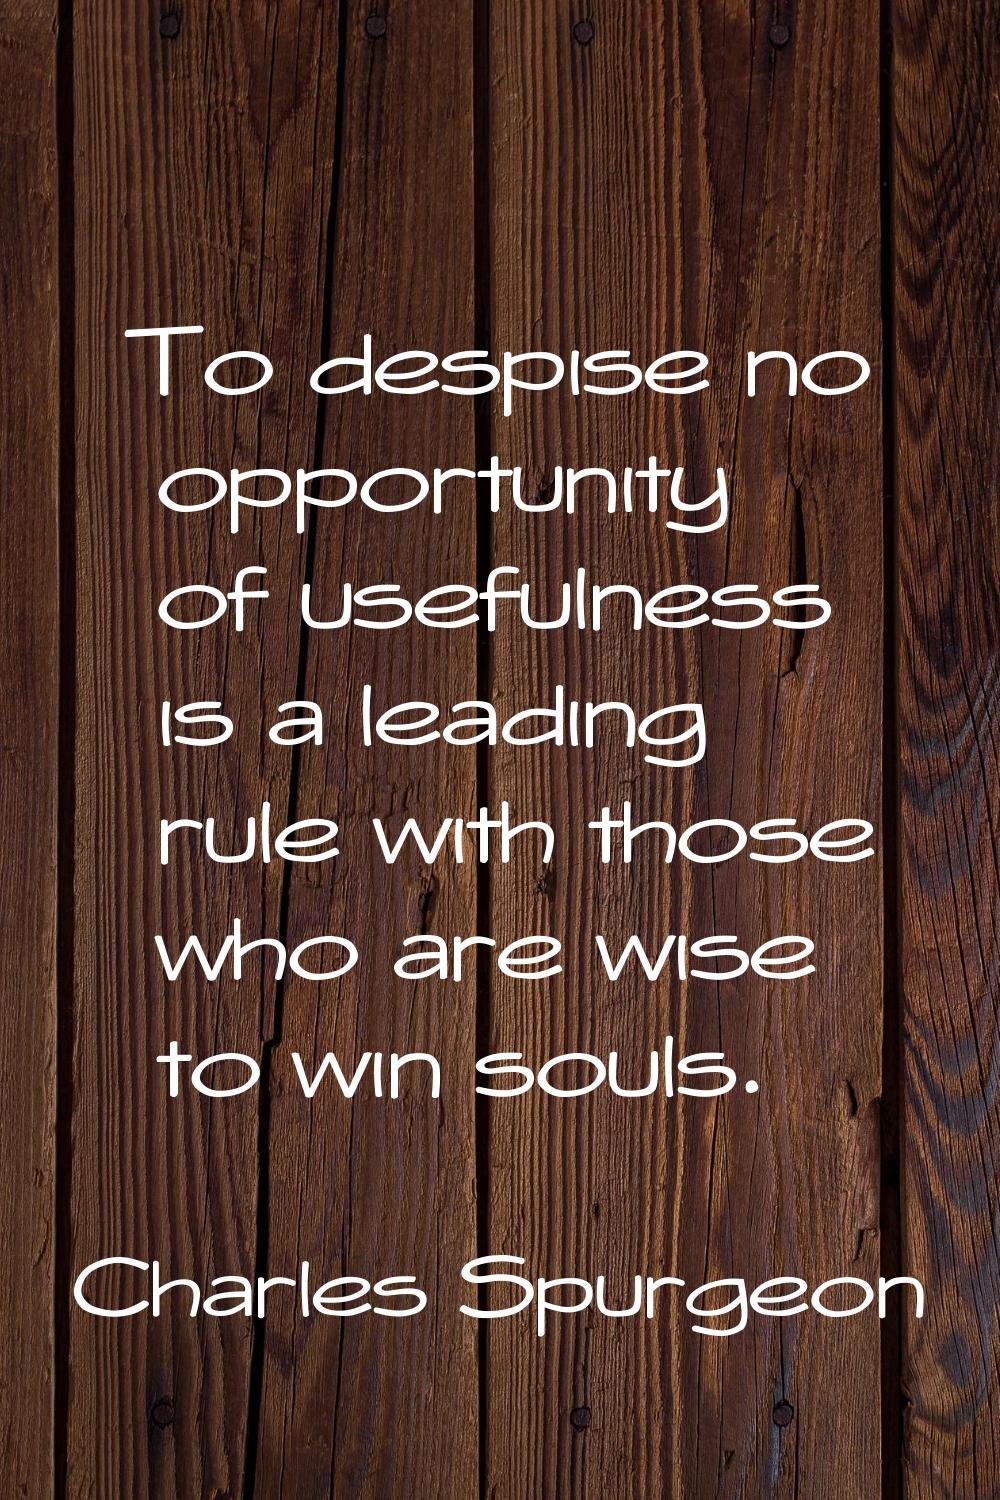 To despise no opportunity of usefulness is a leading rule with those who are wise to win souls.